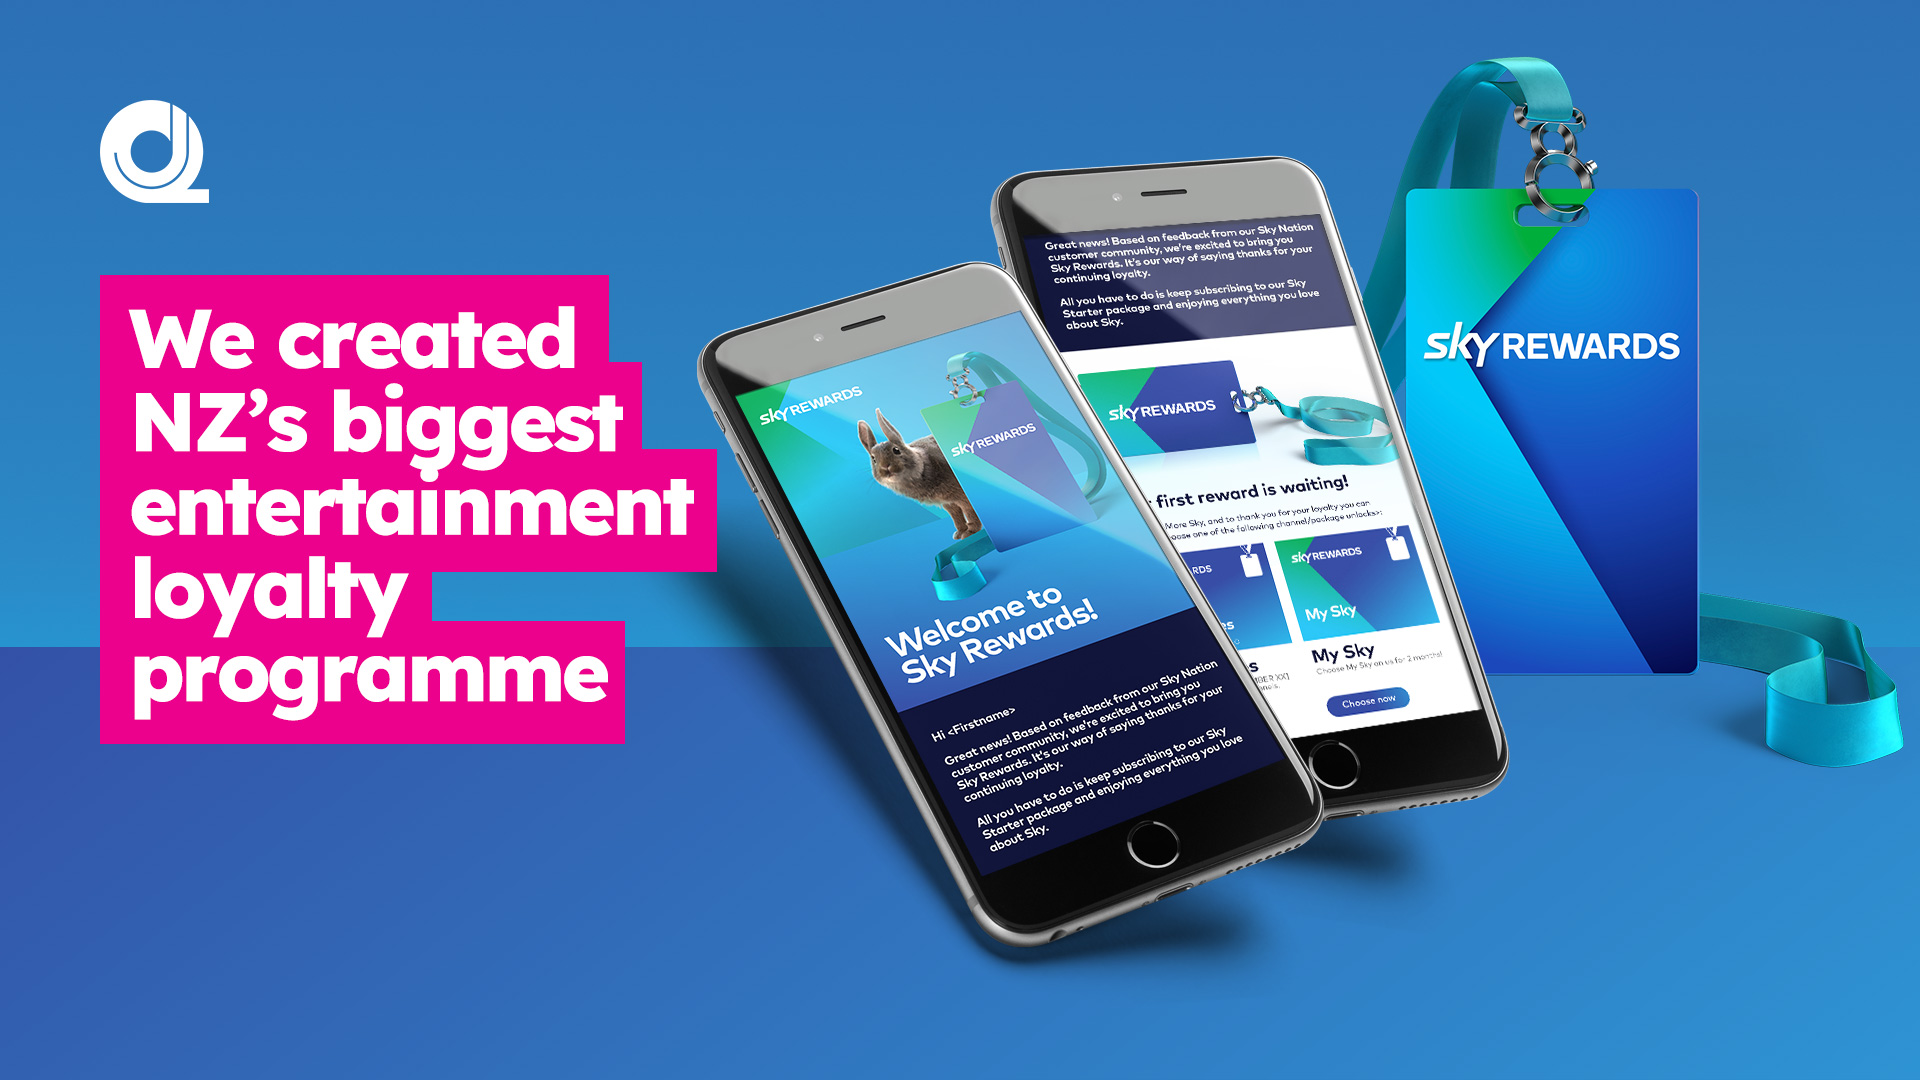 We created NZ’s biggest entertainment loyalty programme